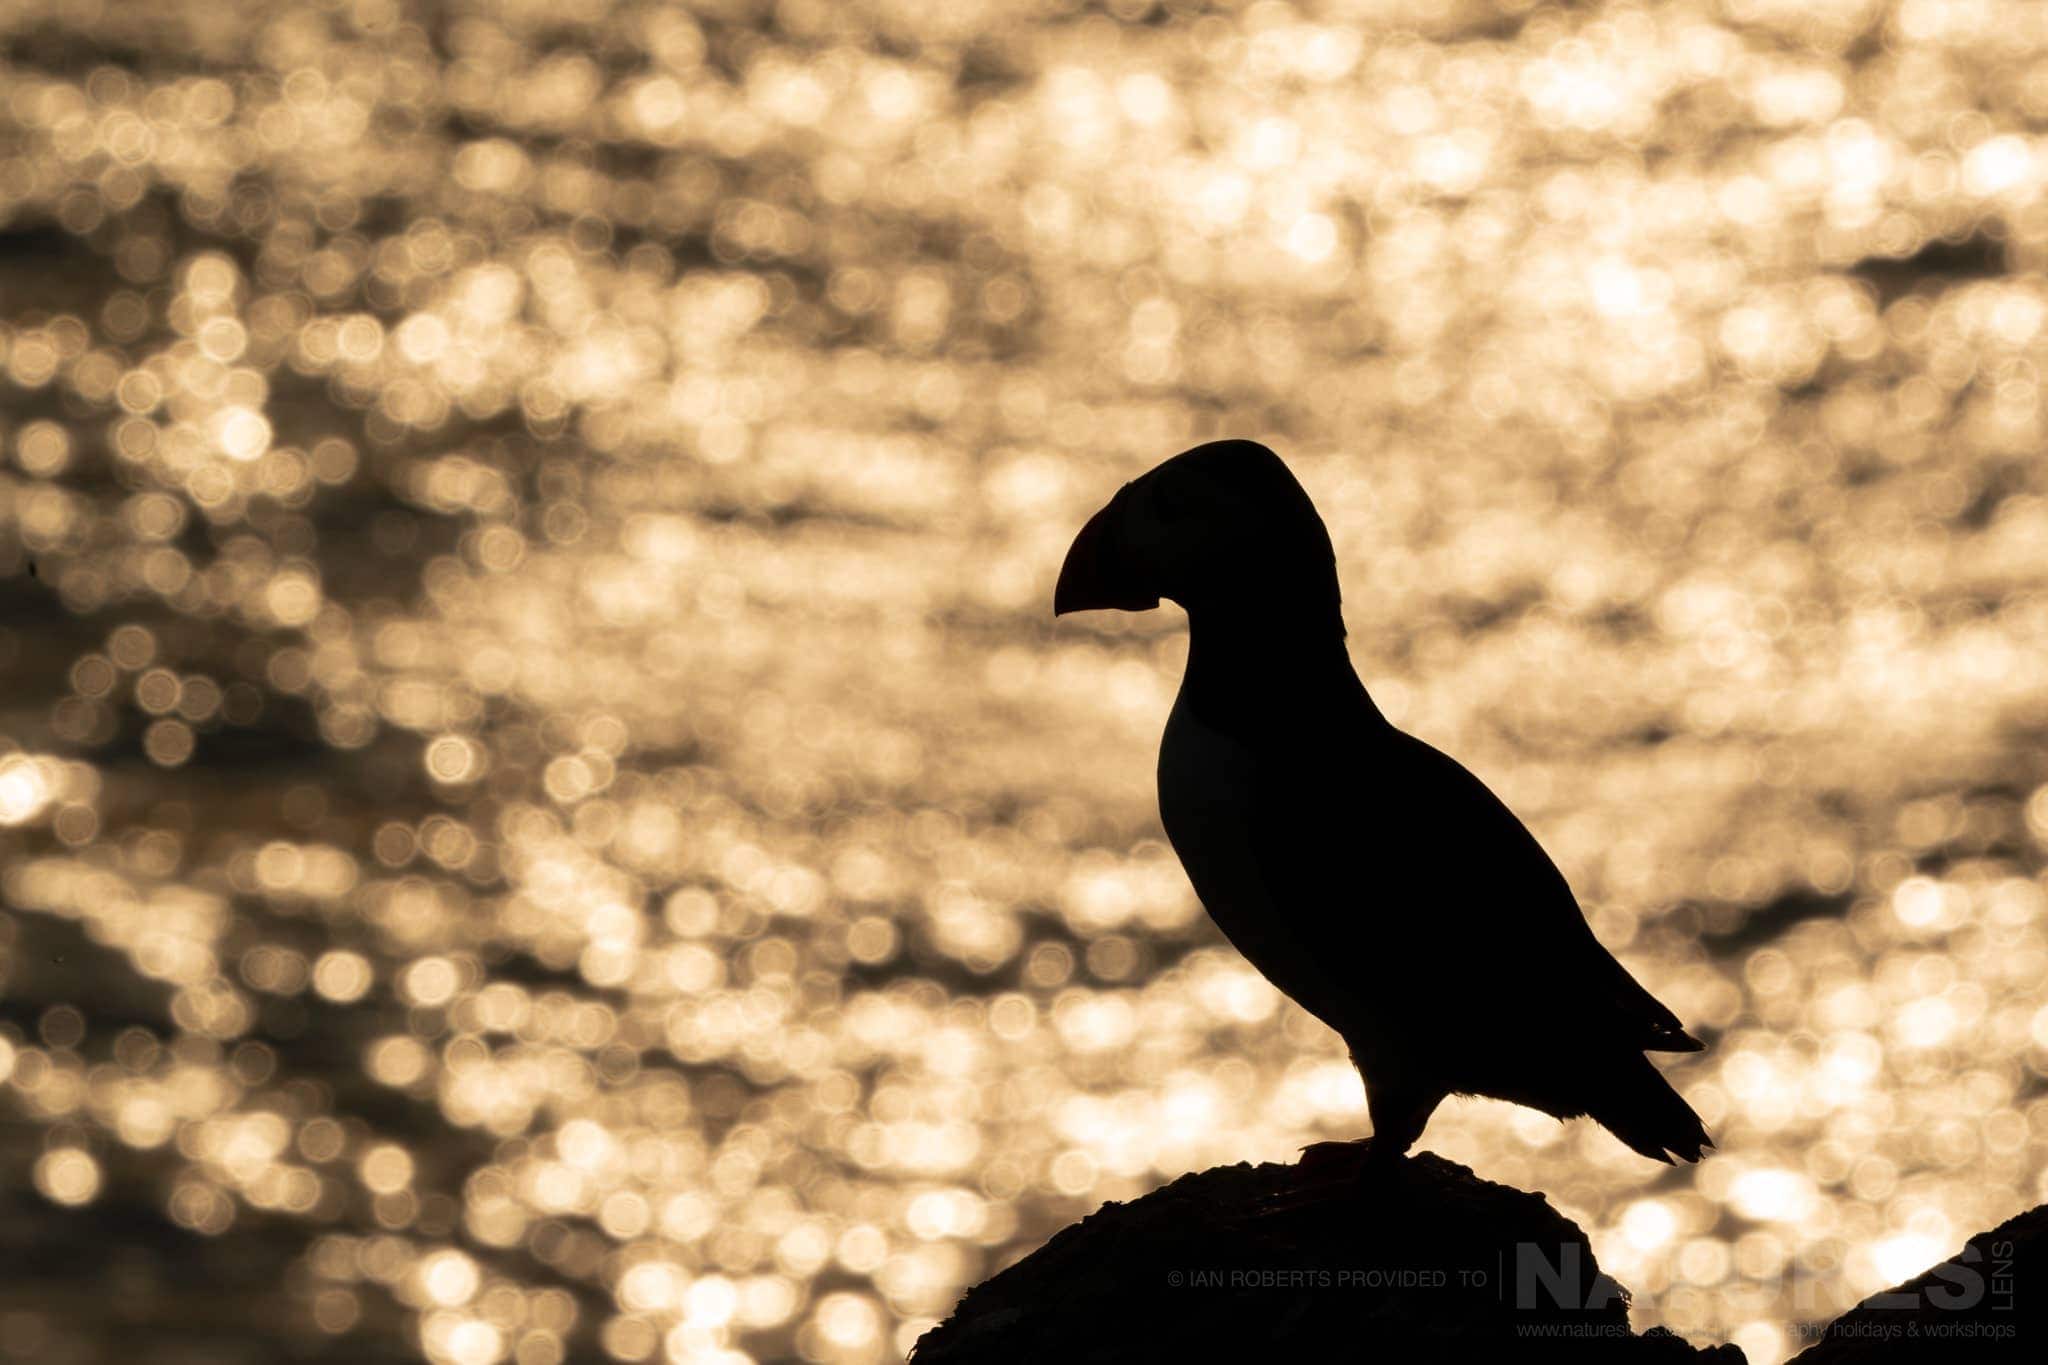 One Of The Puffins Against The Sea Illuminated By The Setting Sun This Image Was Captured By Ian Roberts During The Natureslens Welsh Puffins Of Skomer Island Photography Holiday